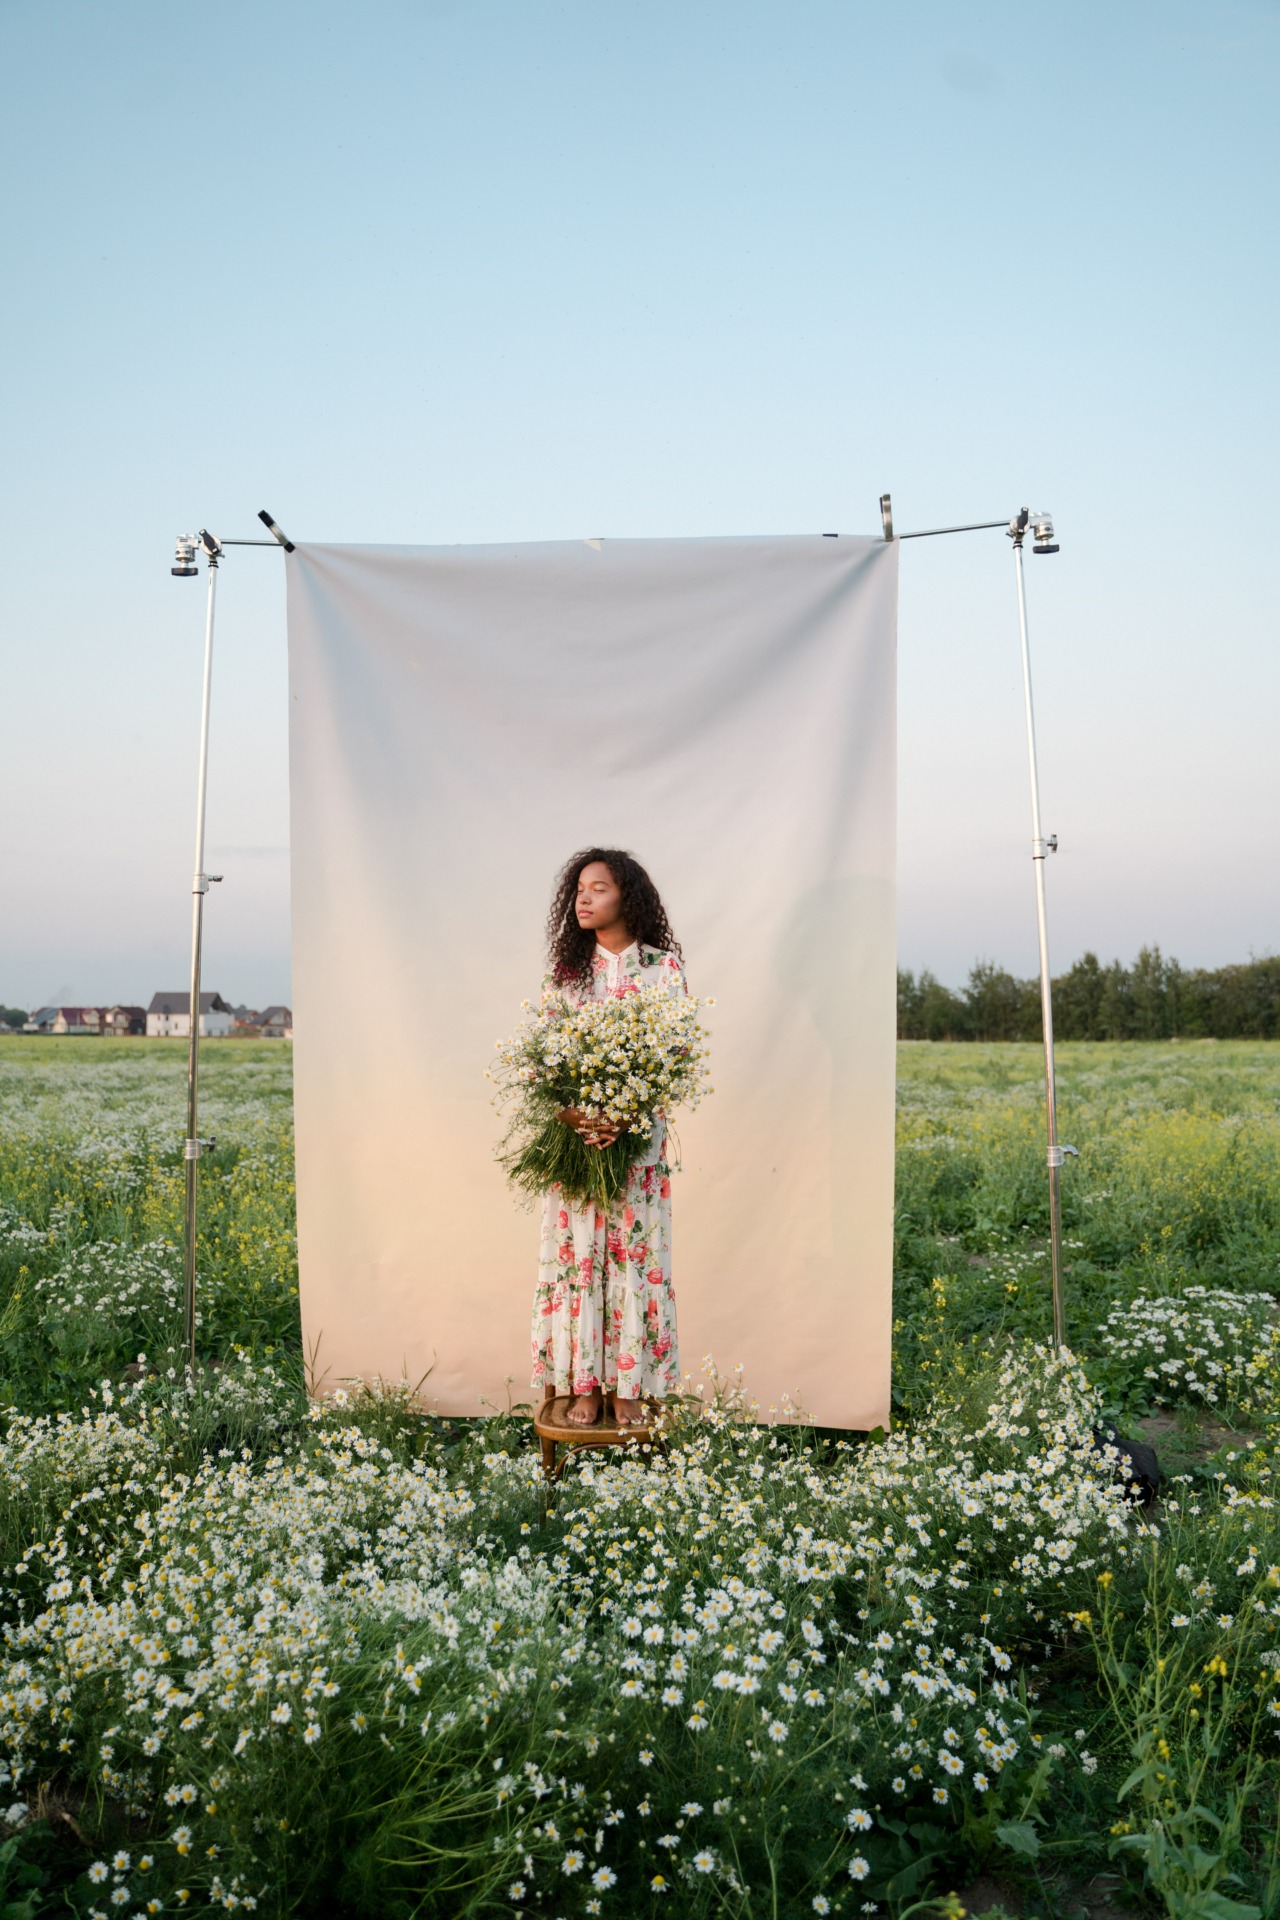 a woman holding flowers while standing on a chair in a field full of flowers